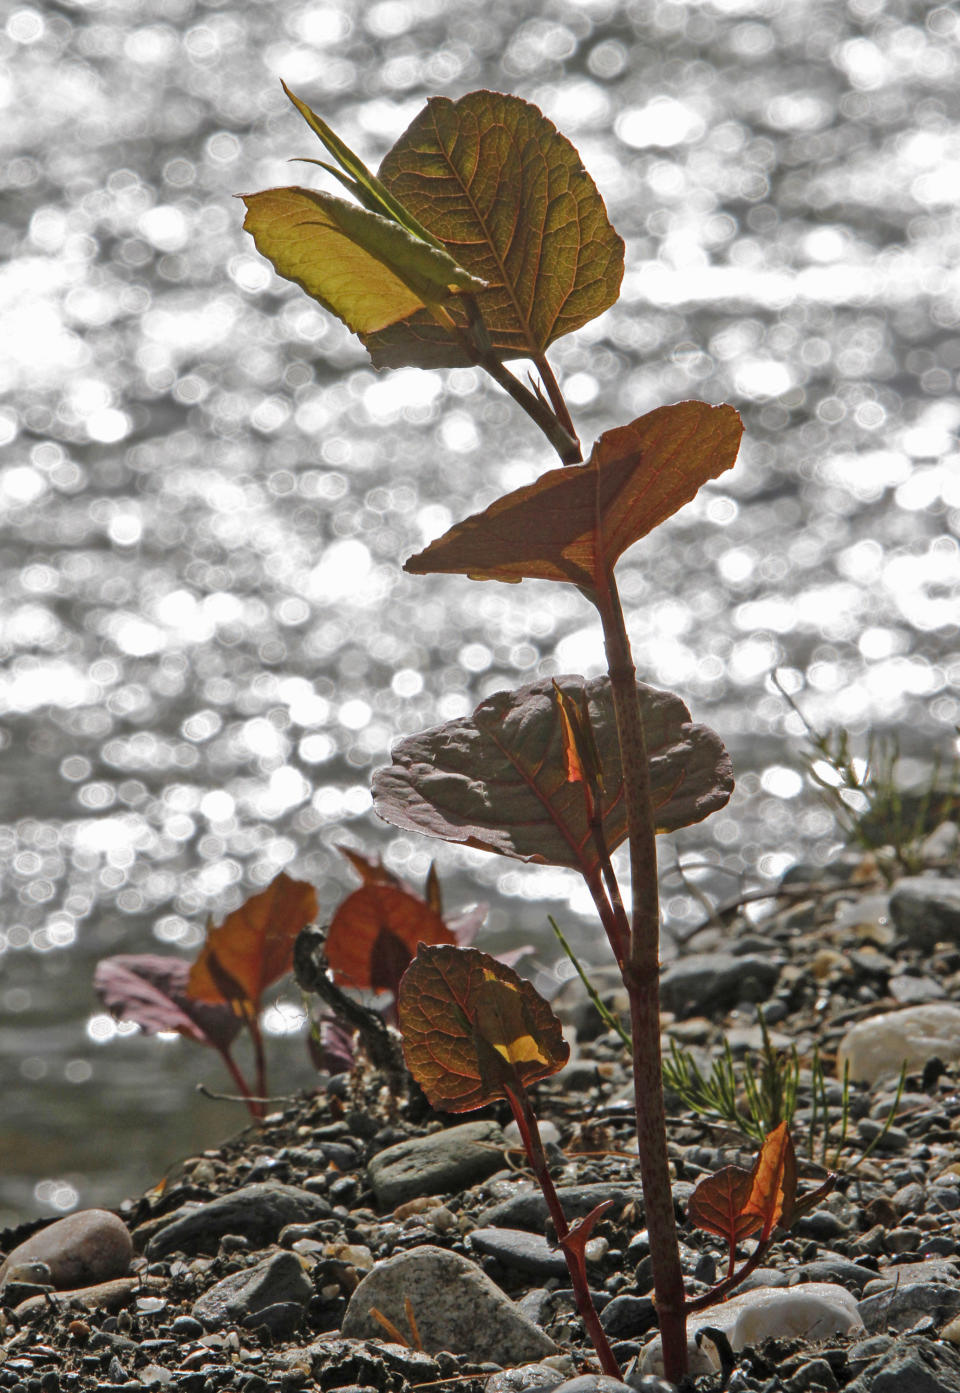 In this April 26, 2012, photo, Japanese knotweed grows on a stream bank in Bethel, Vt. The flood waters of Tropical Storm Irene and work to remove silt and restore roads afterward had an unintended consequence: they spread Japanese knotweed, an invasive plant that has already clogged some river banks and roadsides in Vermont. (AP Photo/Toby Talbot)